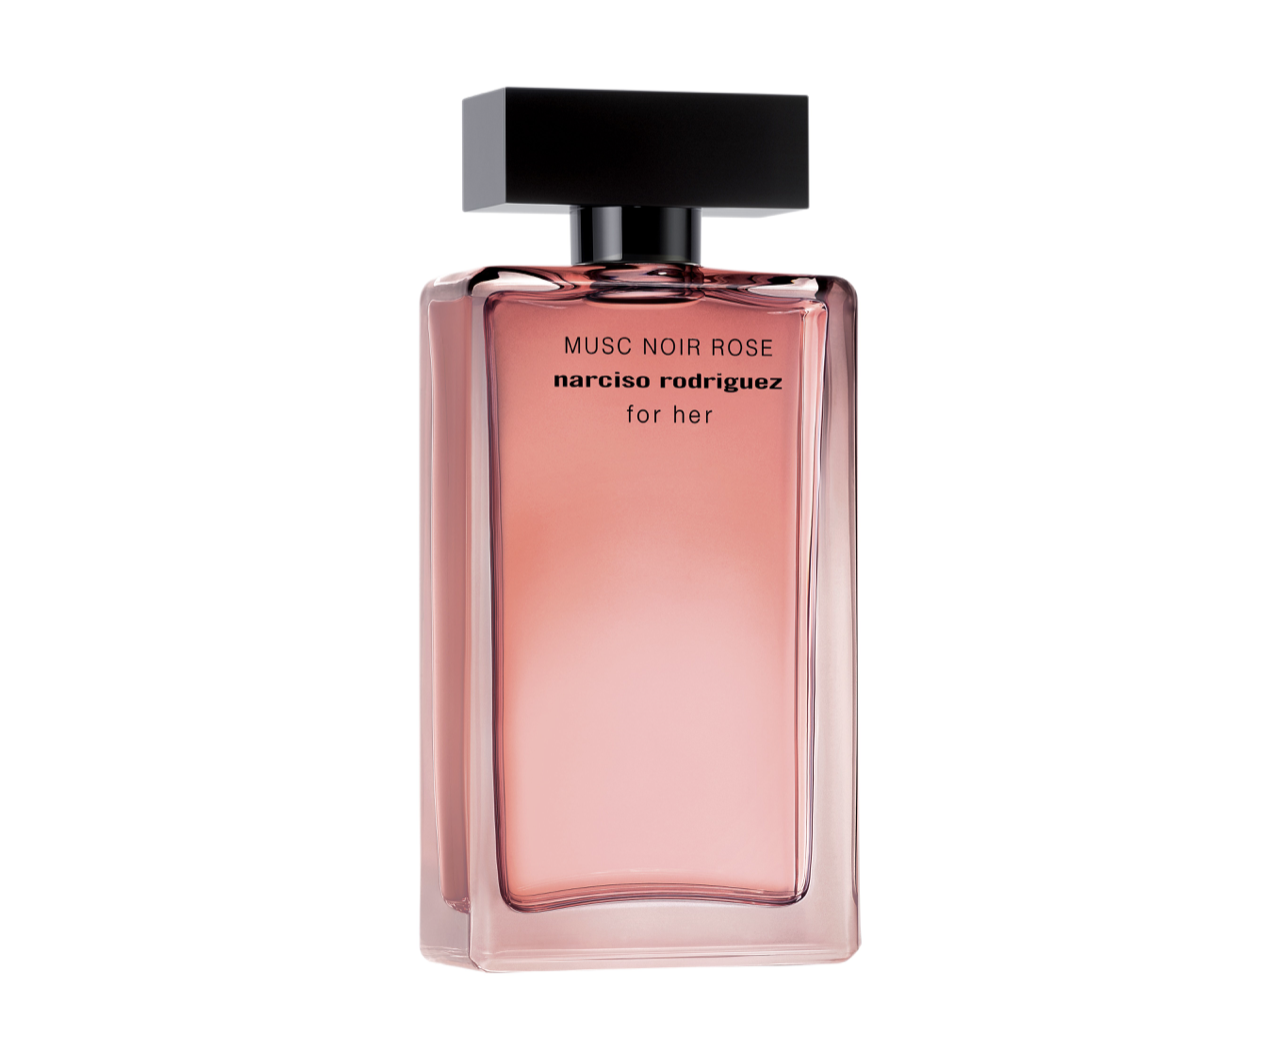 Narciso rodriguez musc noir rose. Narciso Rodriguez Musc Noir Rose for her. Musk Noir Rose Narciso Rodriguez. Narciso Rodriguez Musc collection men.